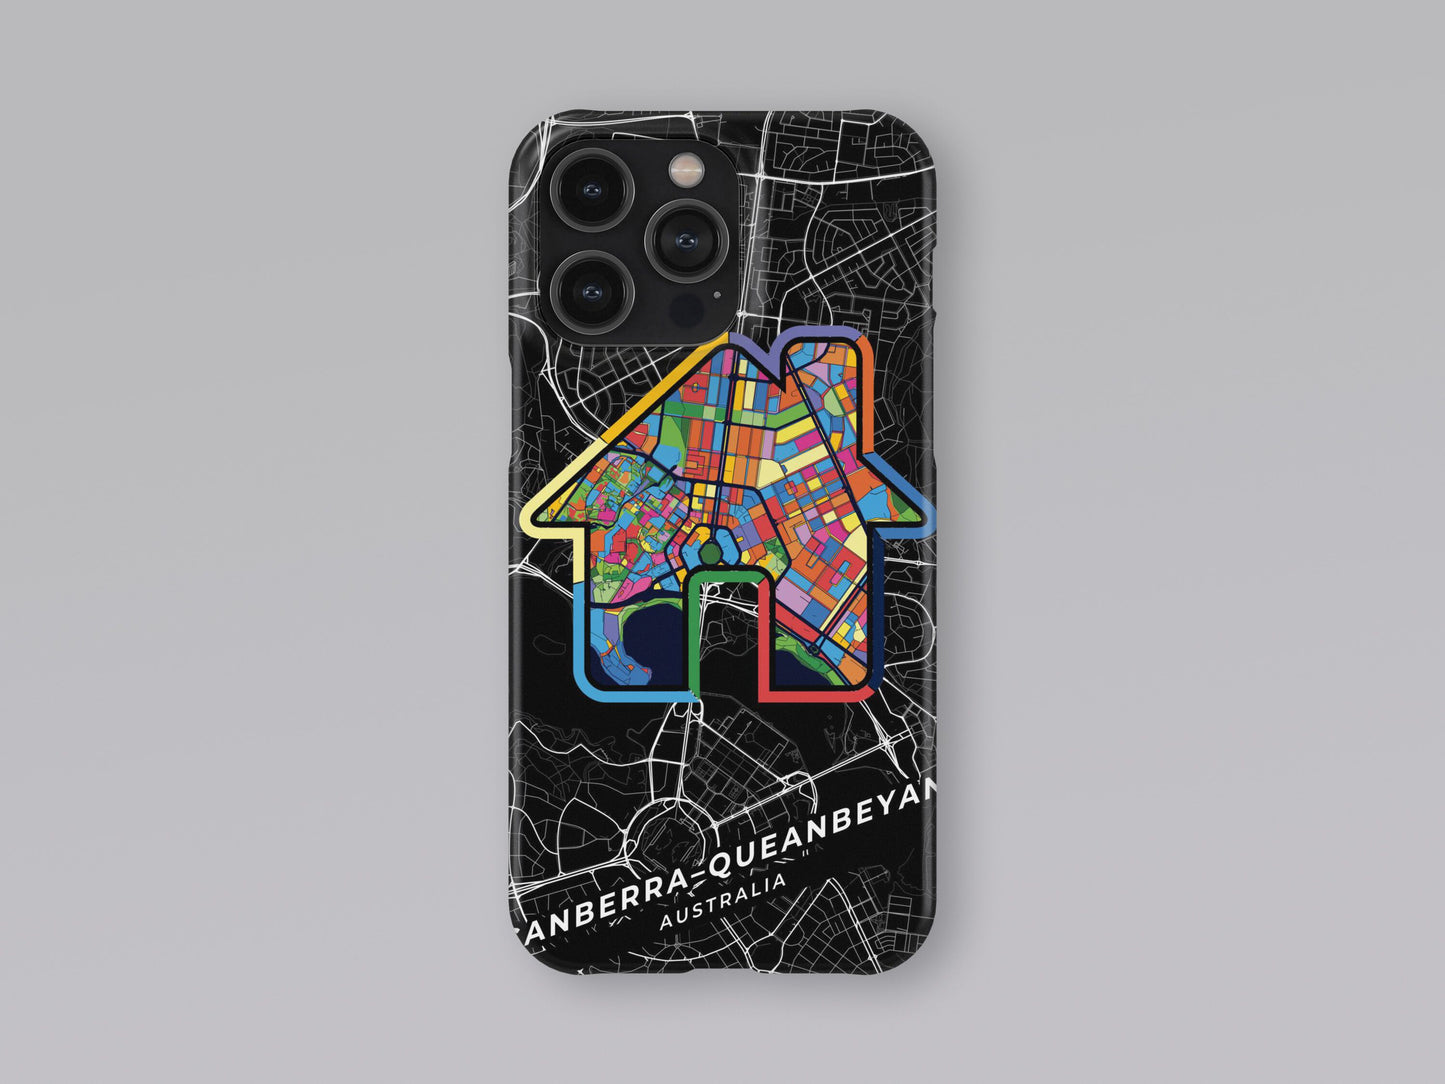 Canberra–Queanbeyan Australia slim phone case with colorful icon. Birthday, wedding or housewarming gift. Couple match cases. 3